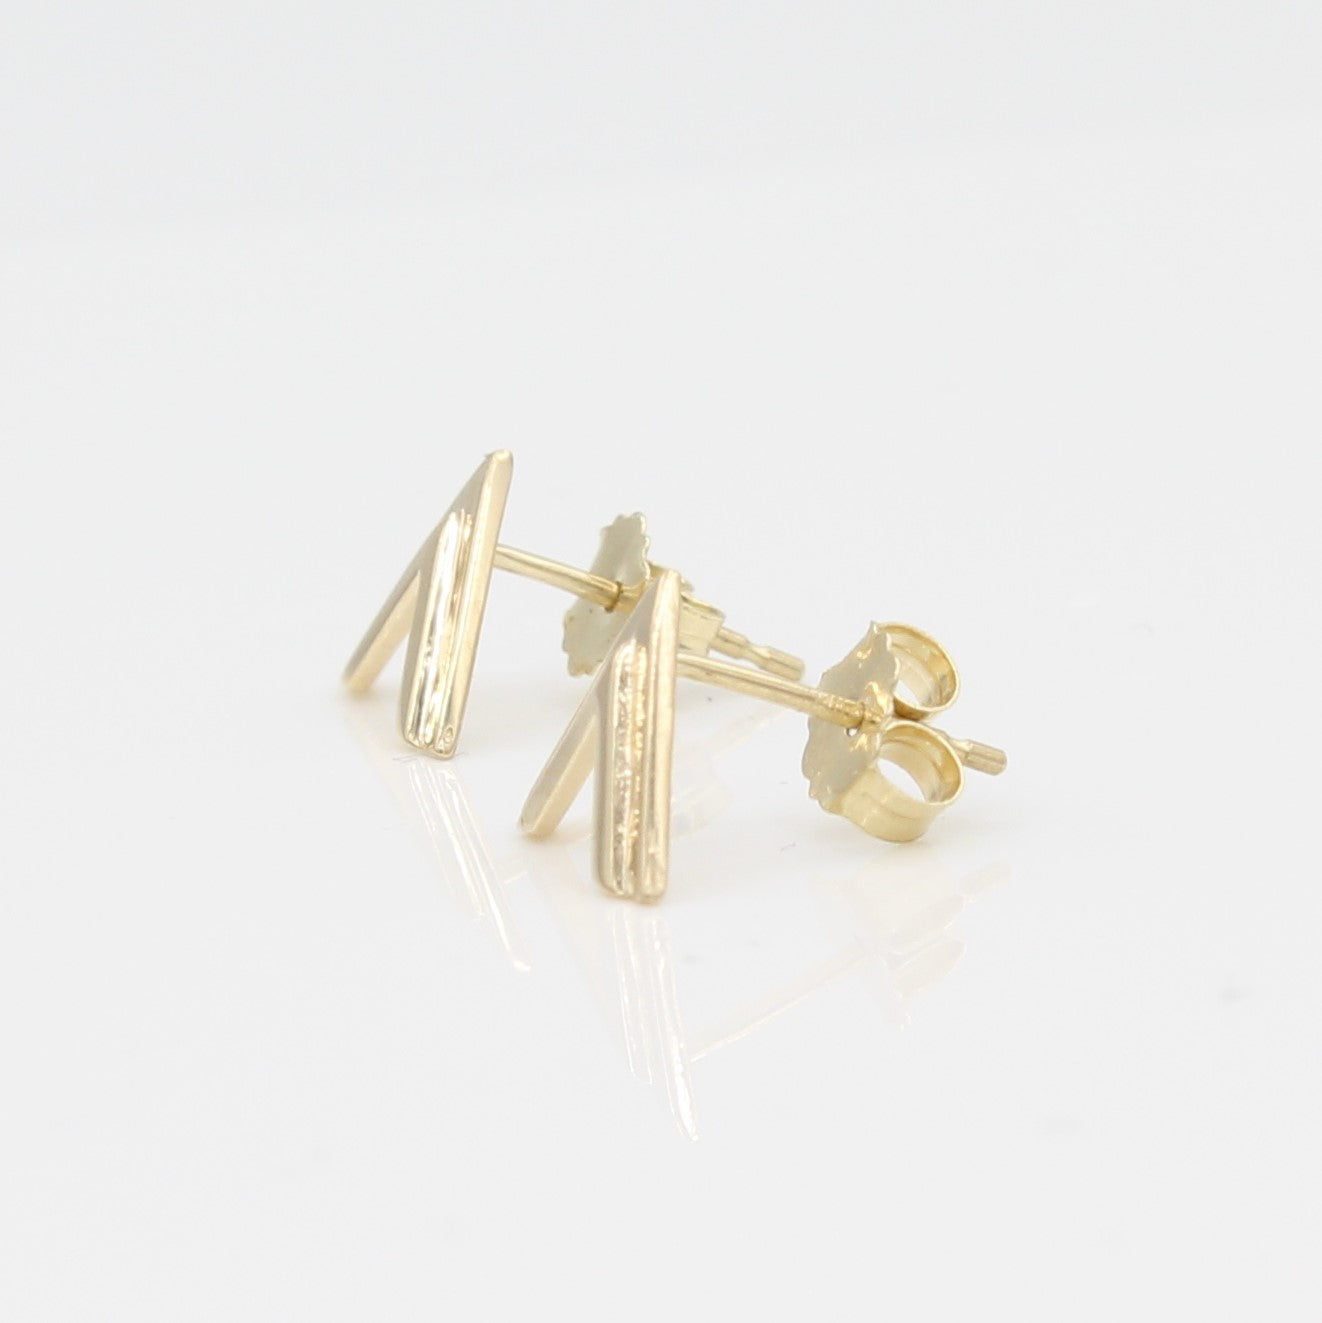 14k Yellow Gold Double Chevron Earrings, side view from right with a peak at the earring's posts and backs. 